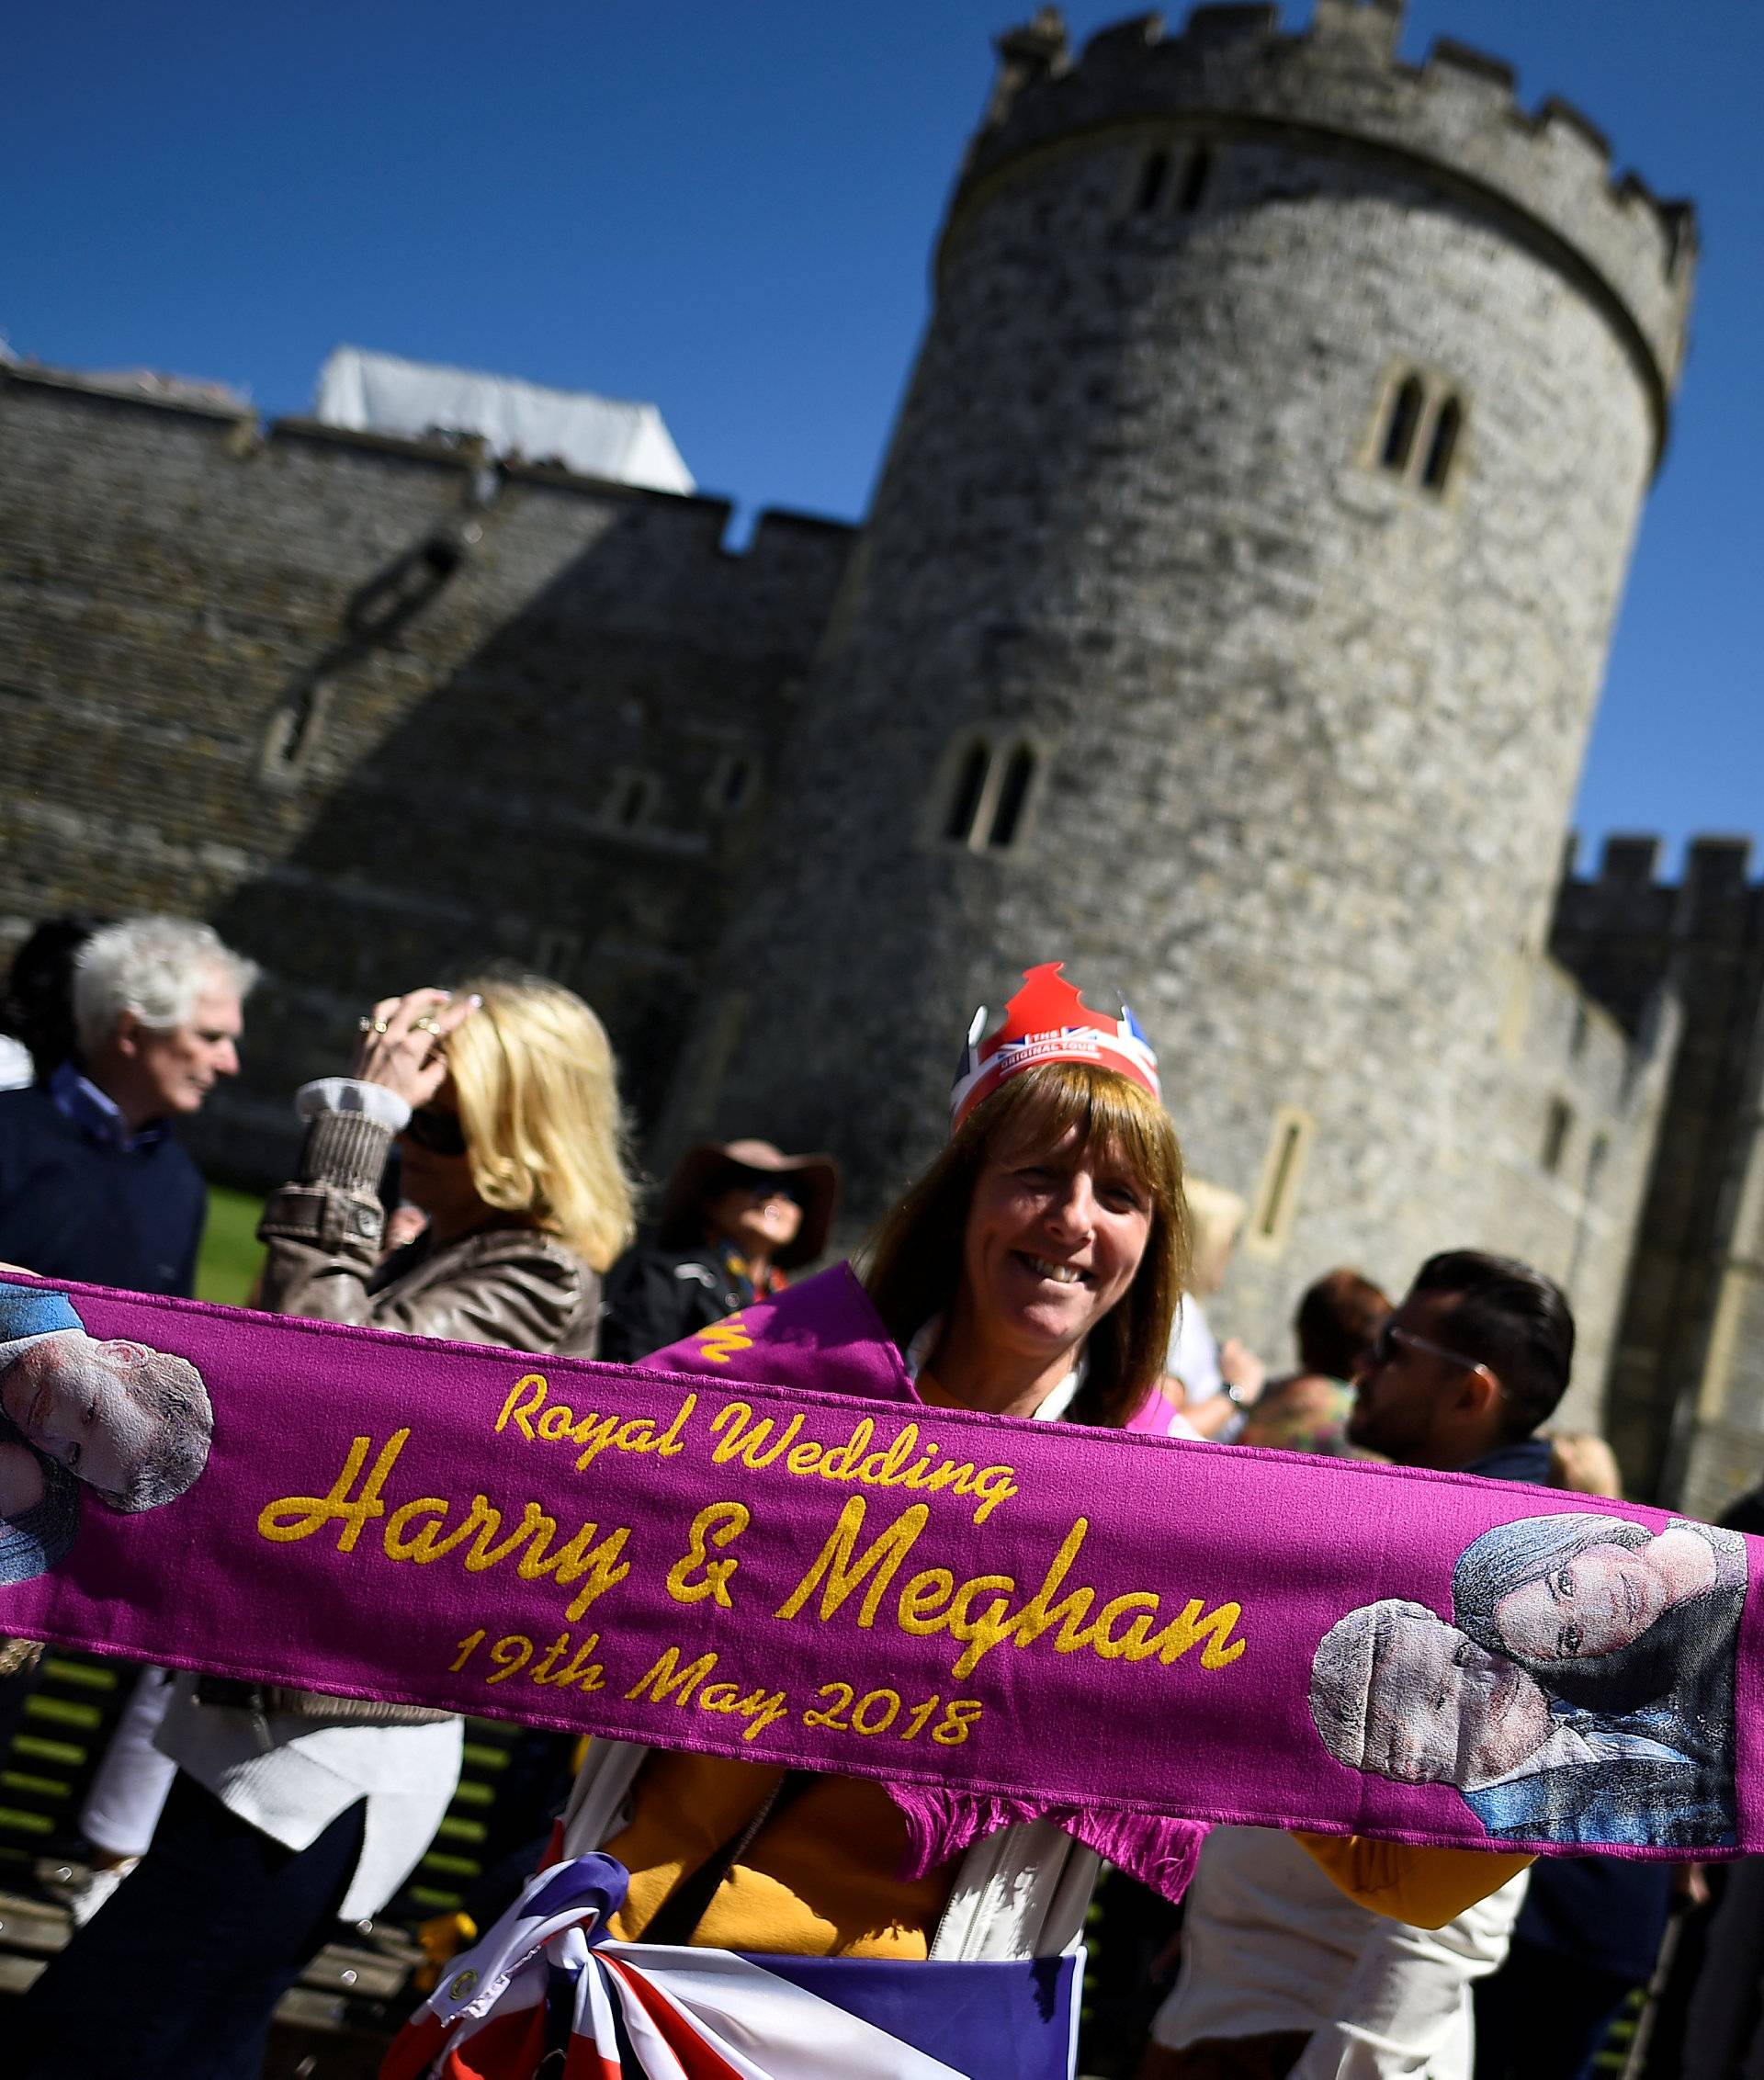 A woman holds up a commemorative scarf during rehearsals for the wedding of Britain's Prince Harry and Meghan Markle in Windsor